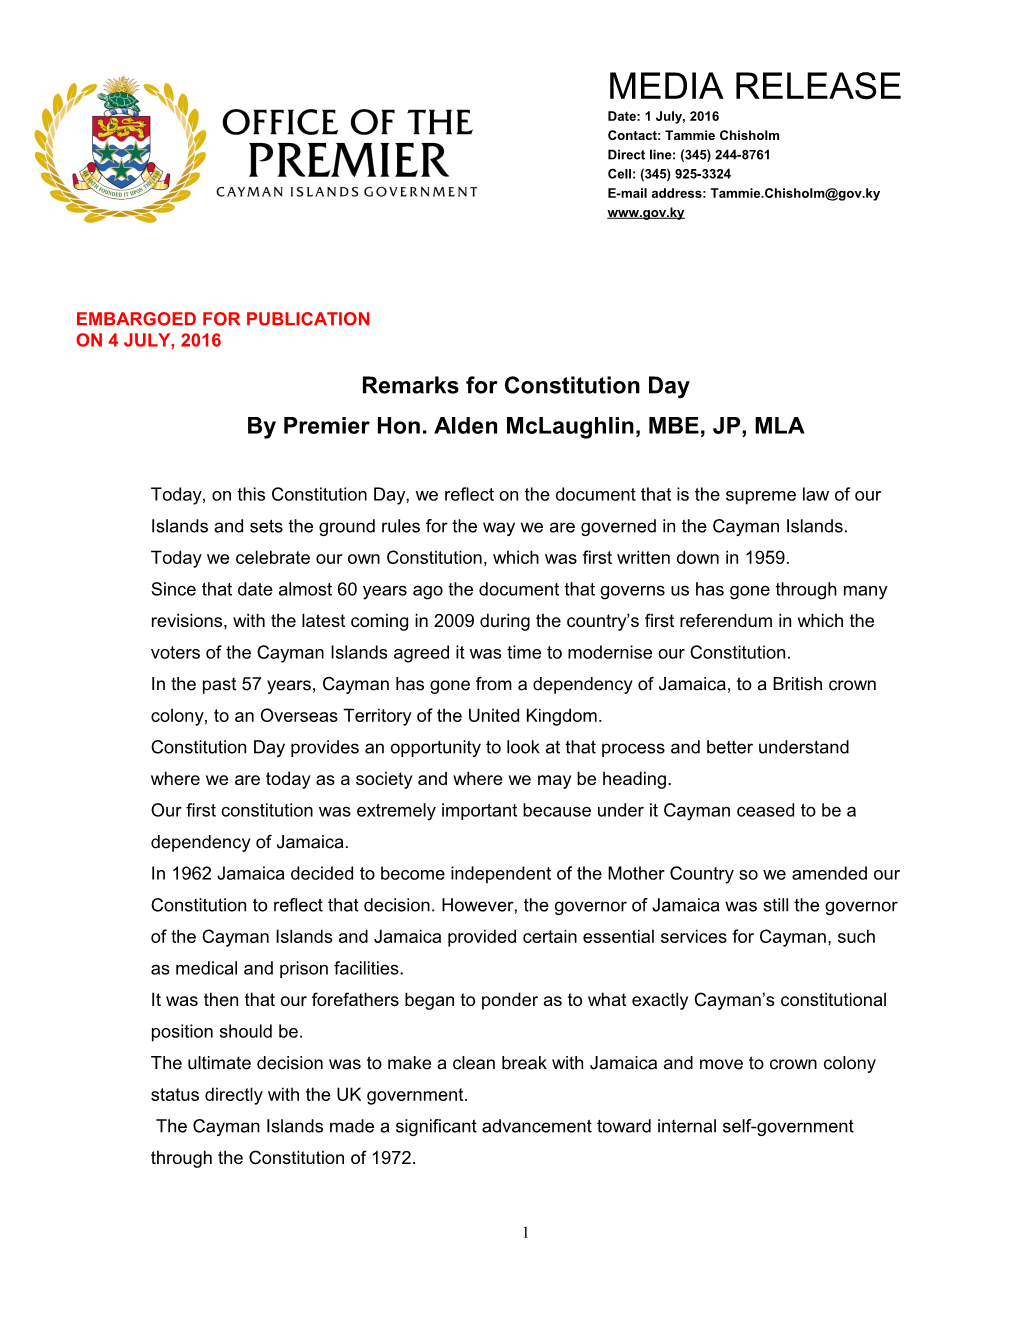 Remarks for Constitution Day